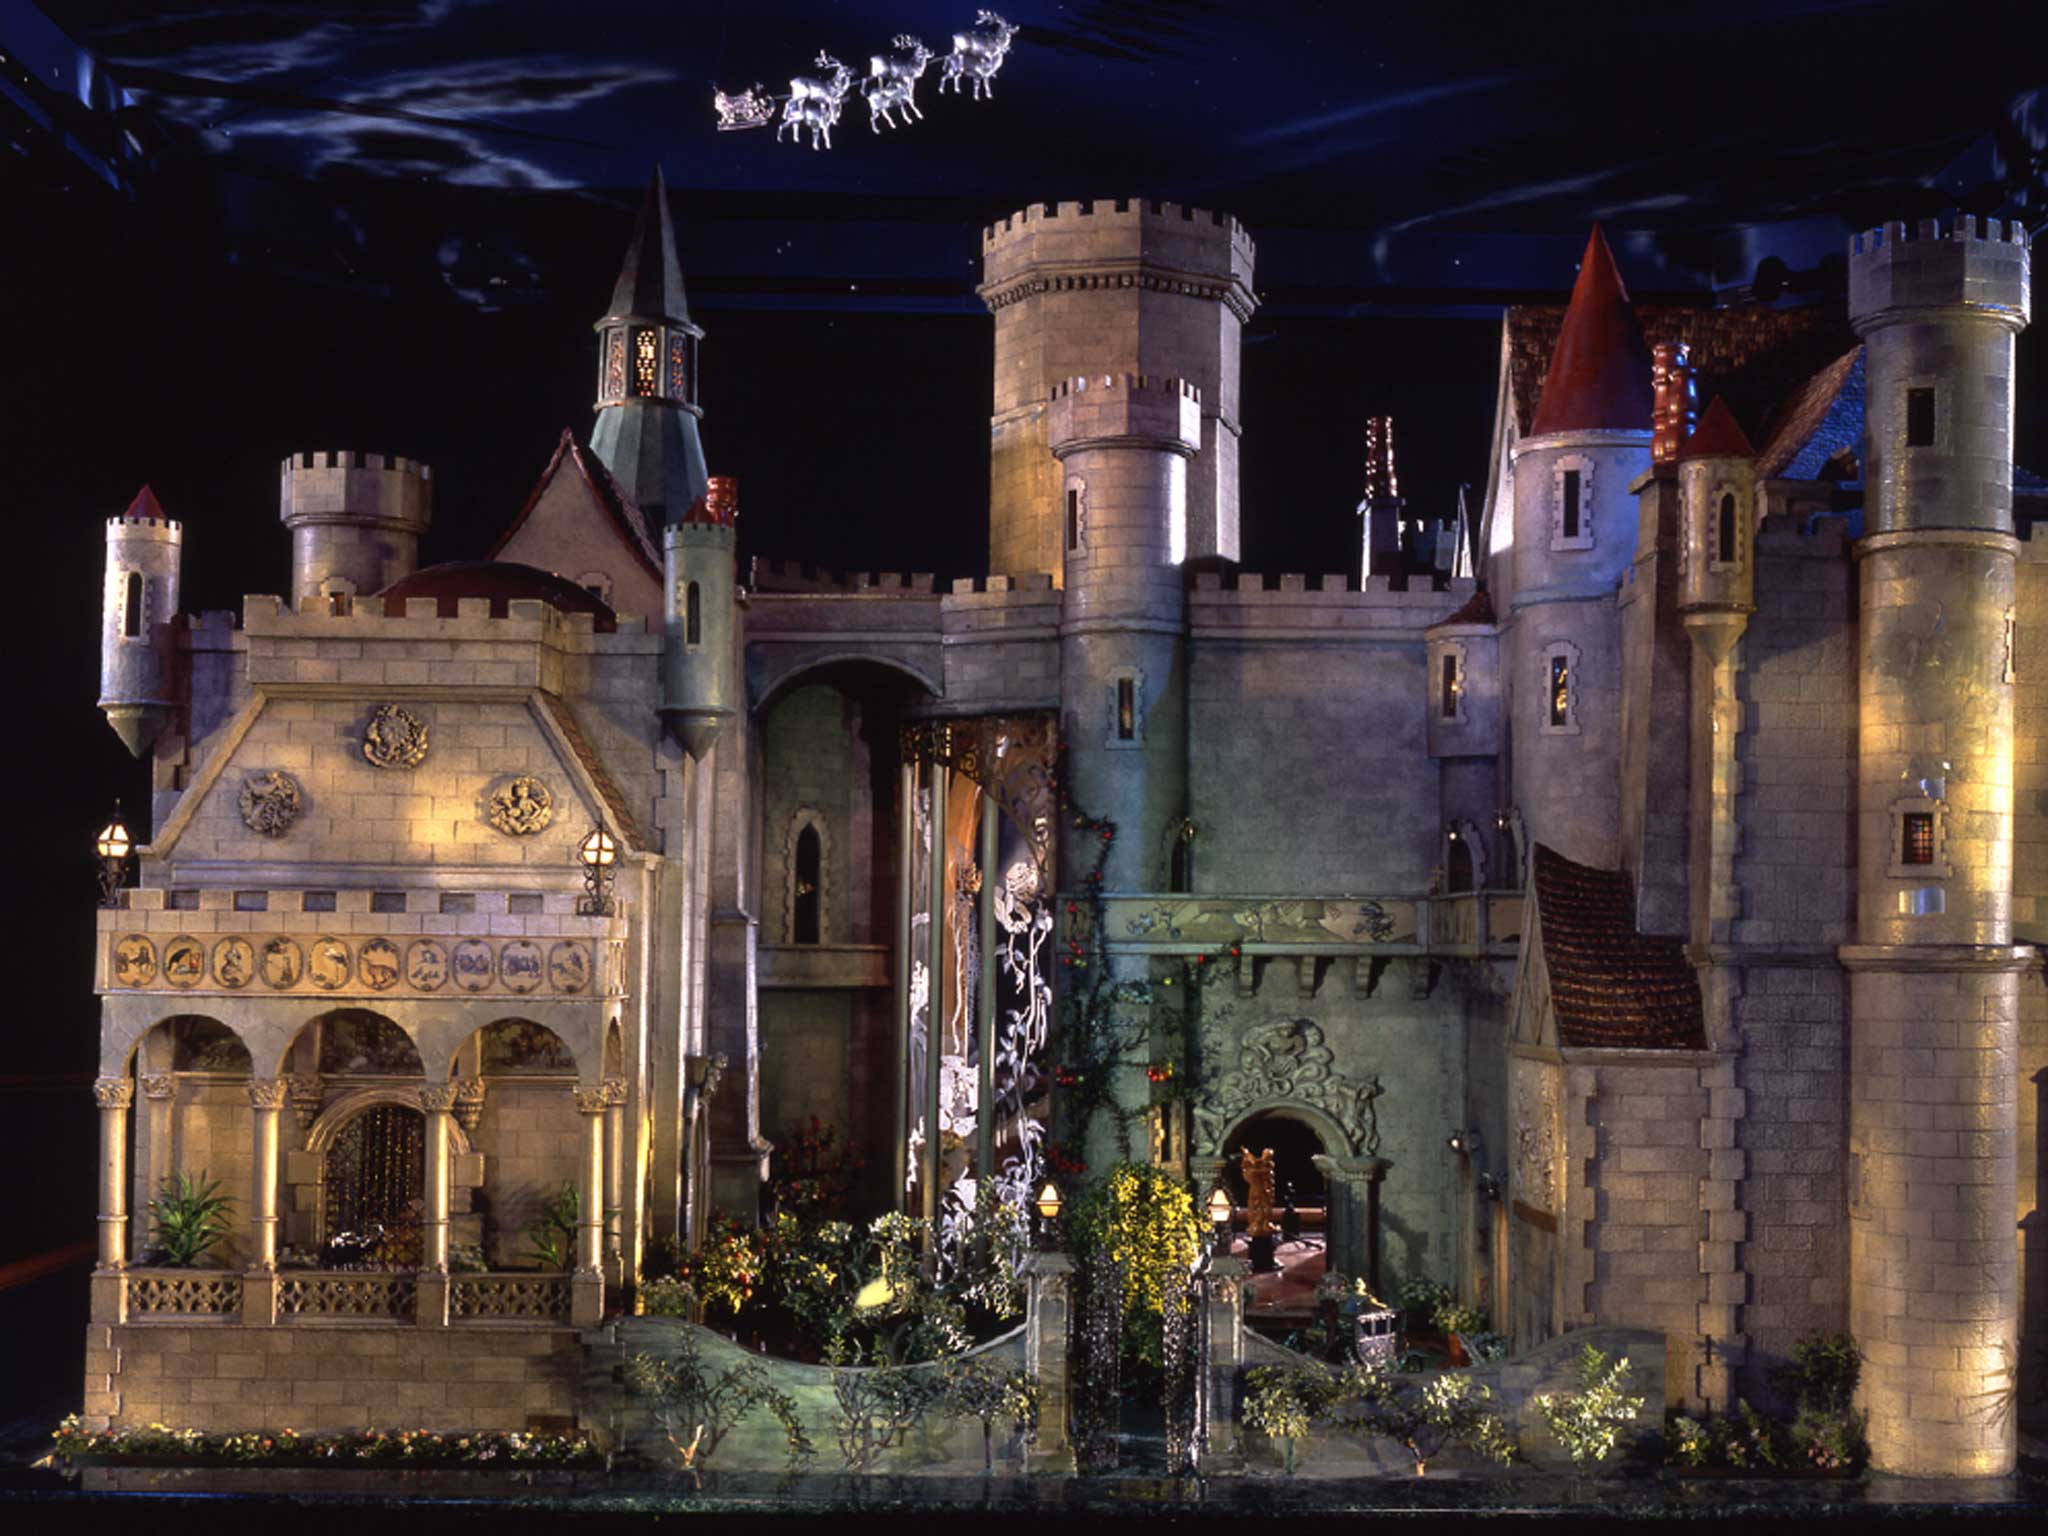 The Fairy Castle was created by silent film star Colleen Moore